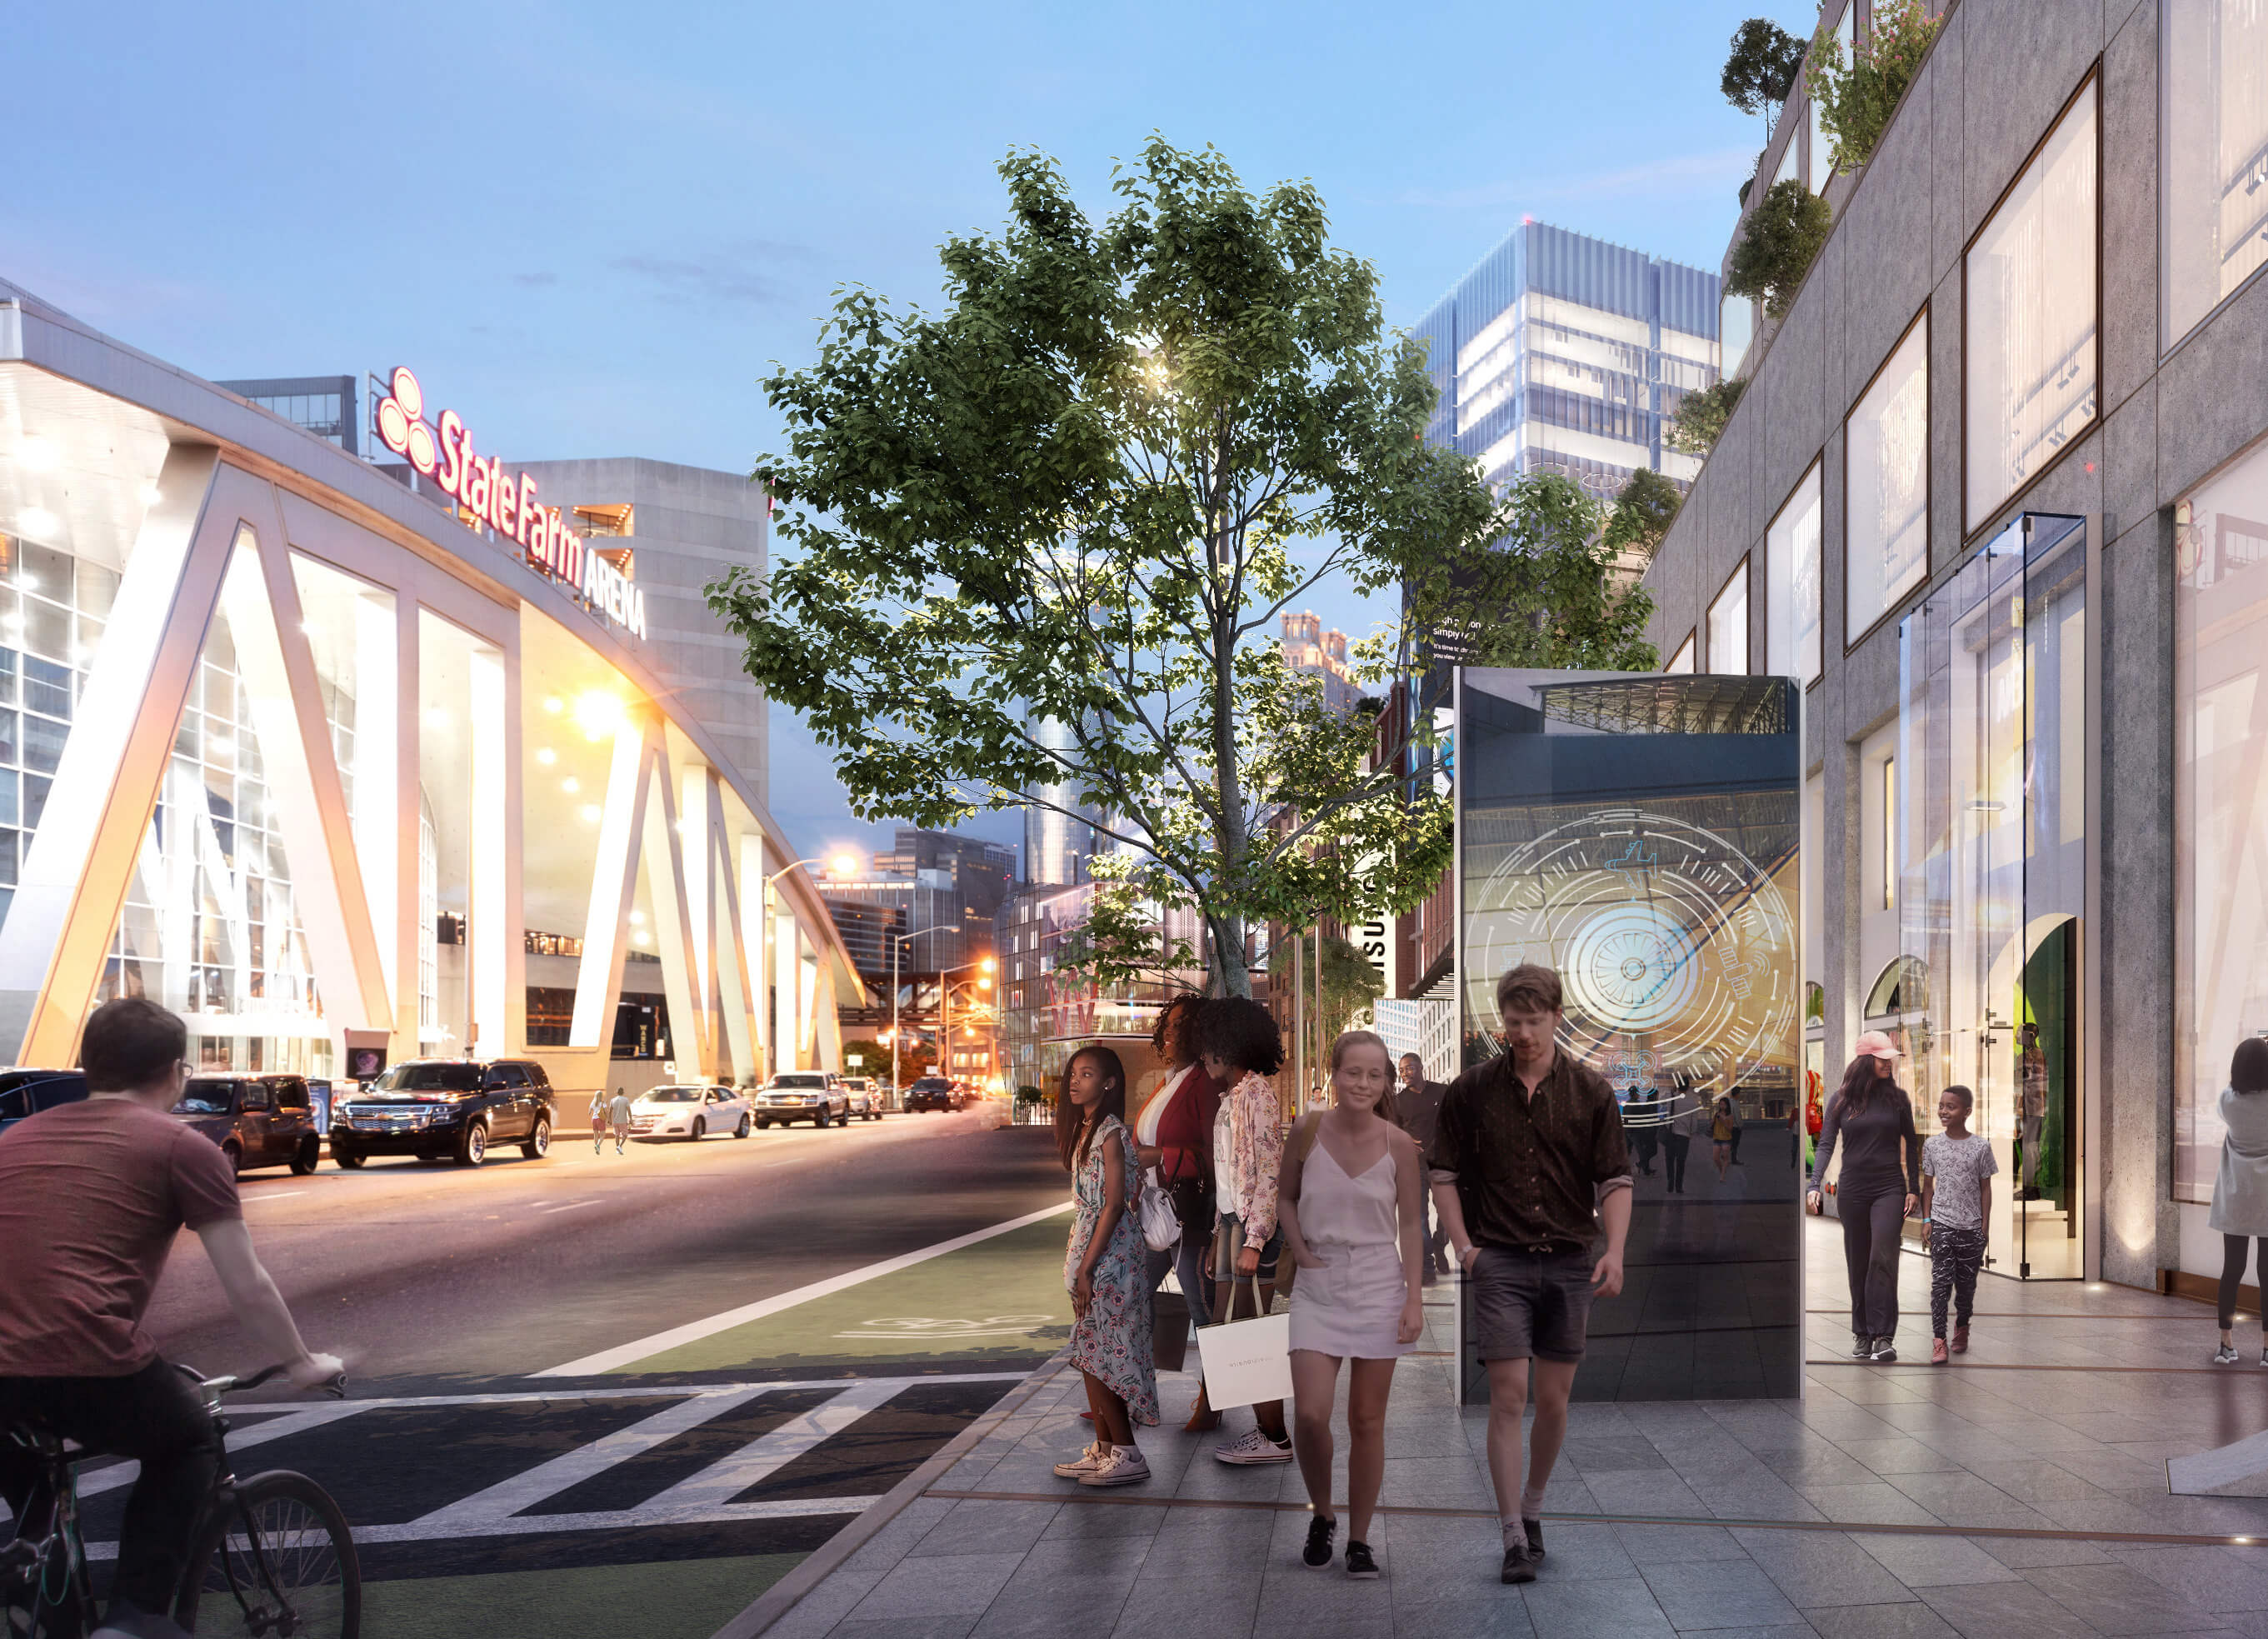 rendering of a busy street within a mixed-use entertainment district